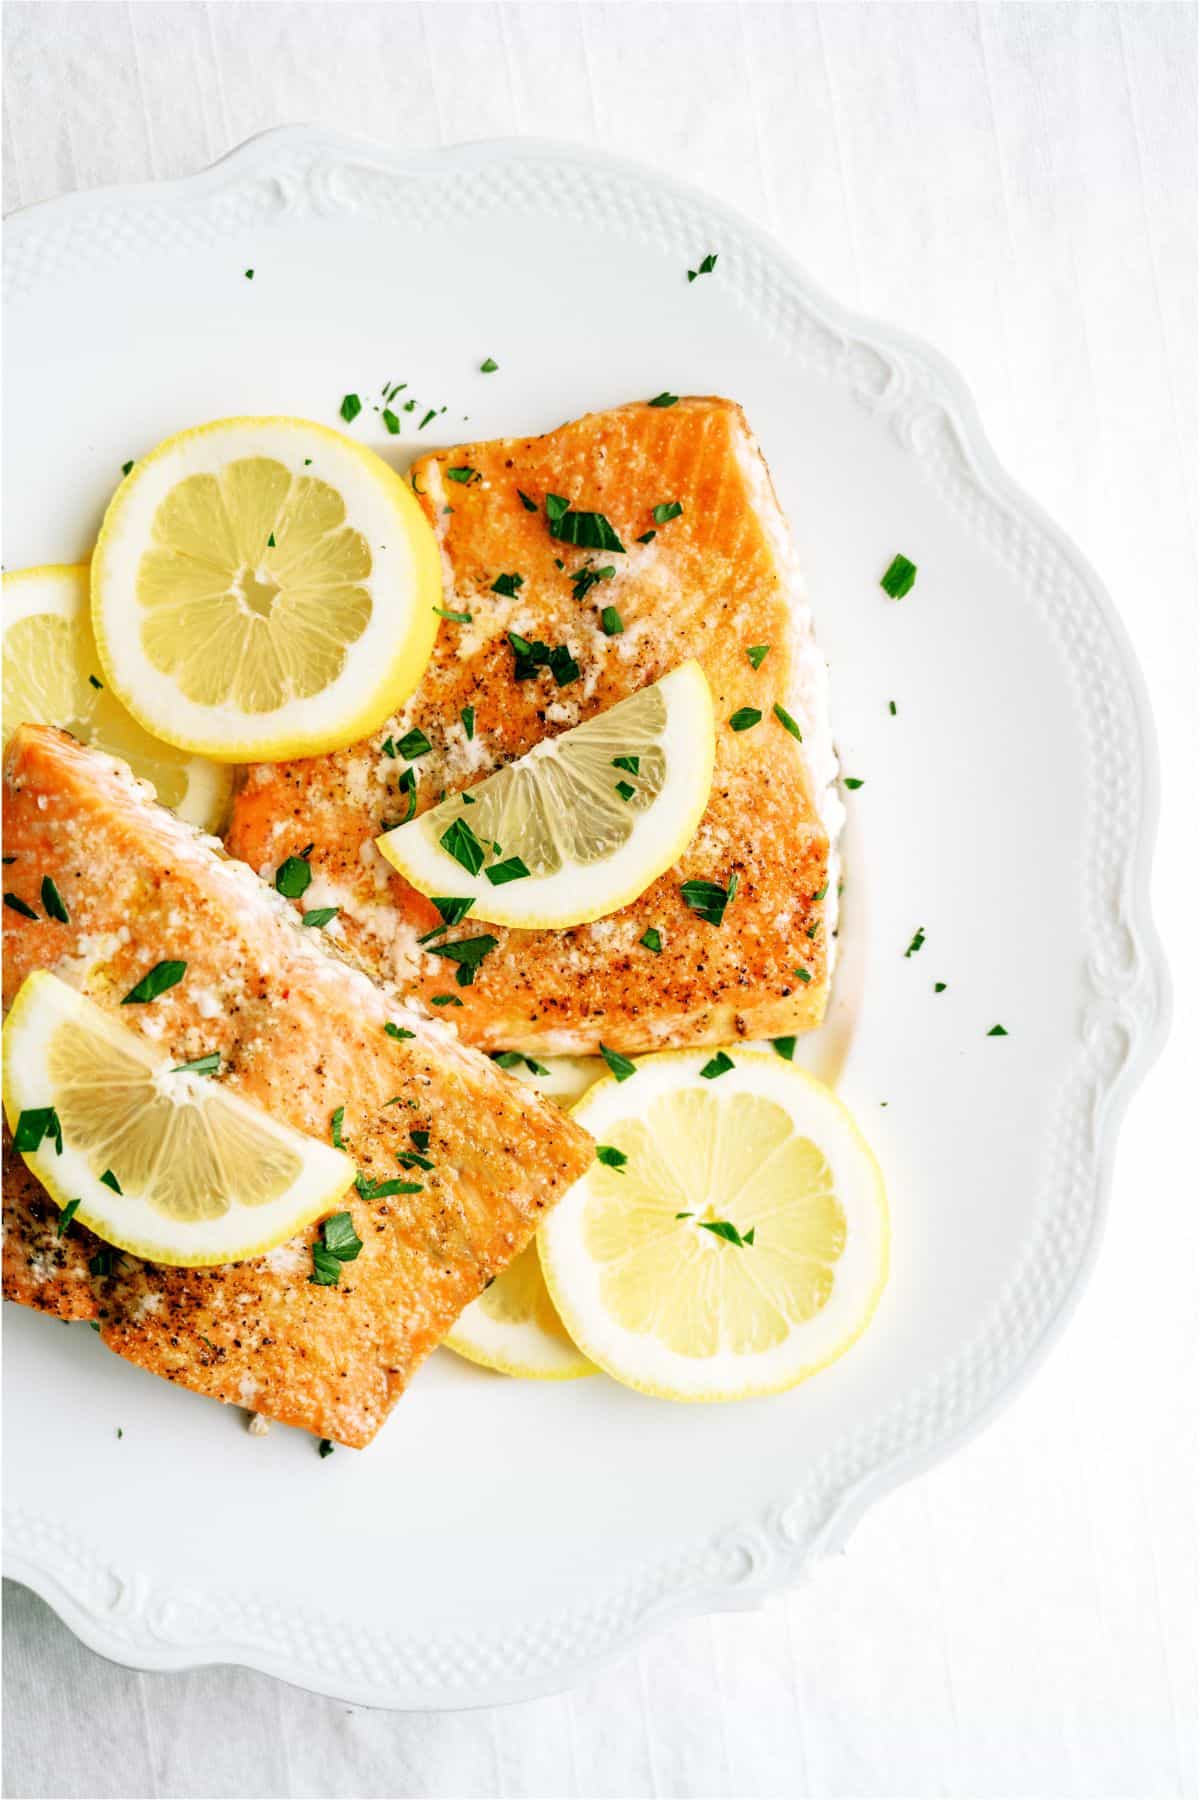 Baked Salmon topped with fresh lemon on a plate